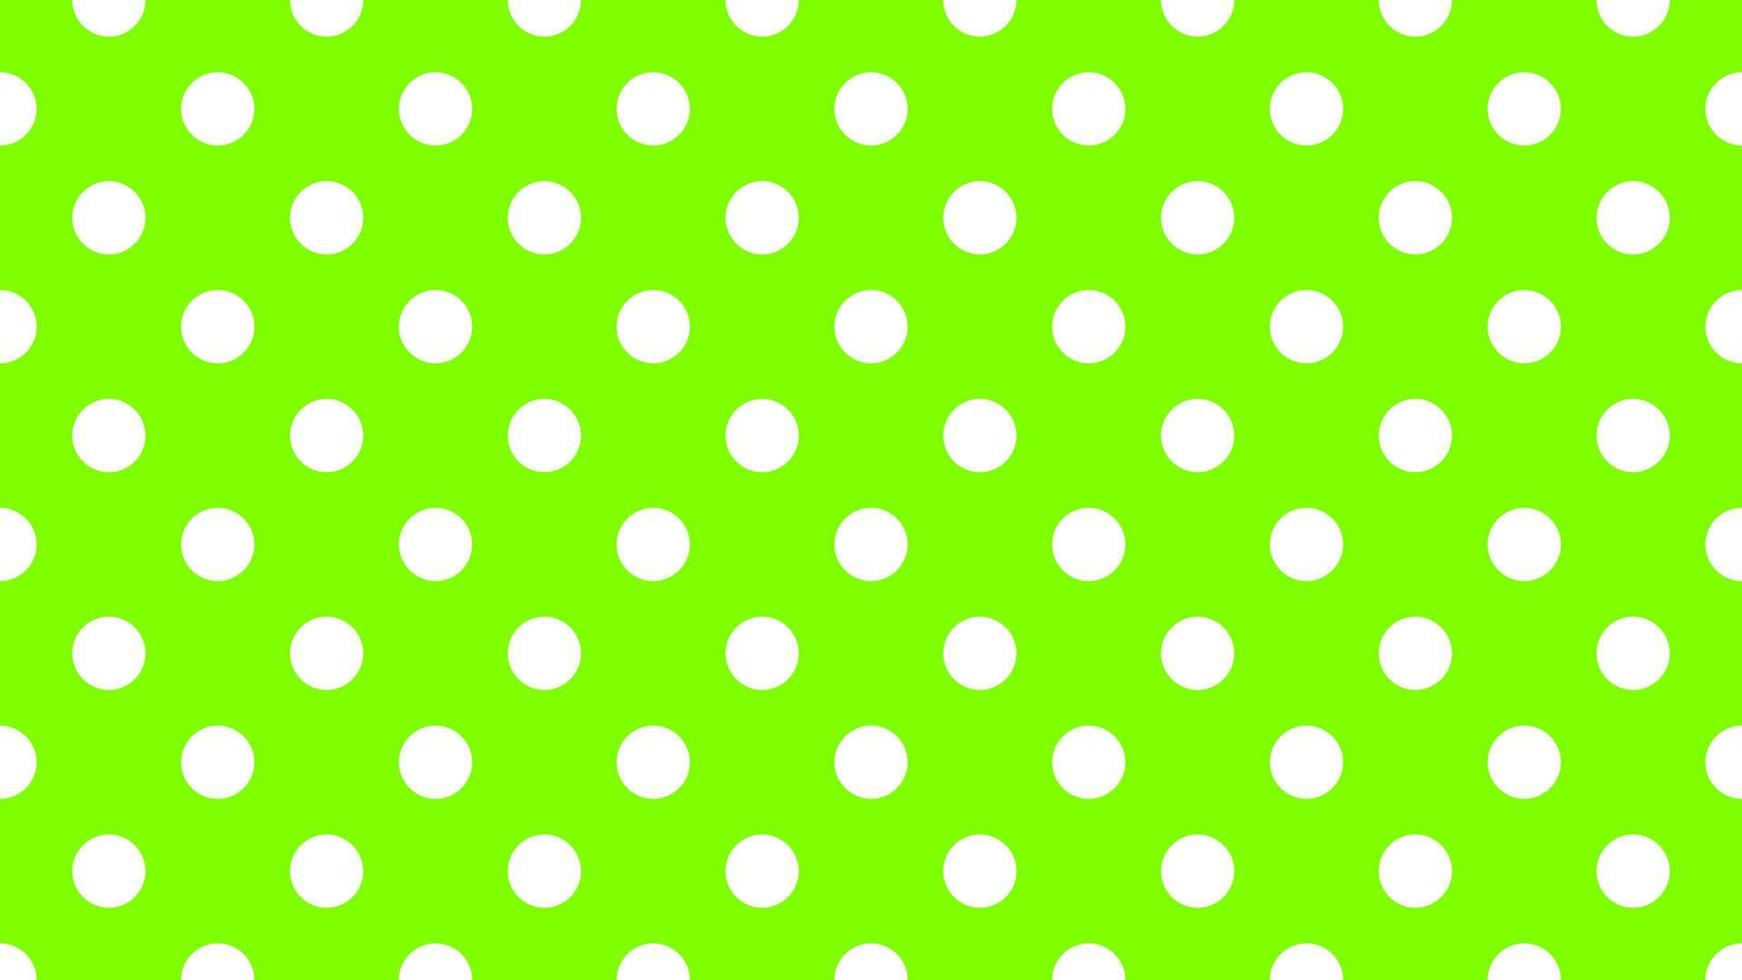 white color polka dots over chartreuse green background vector